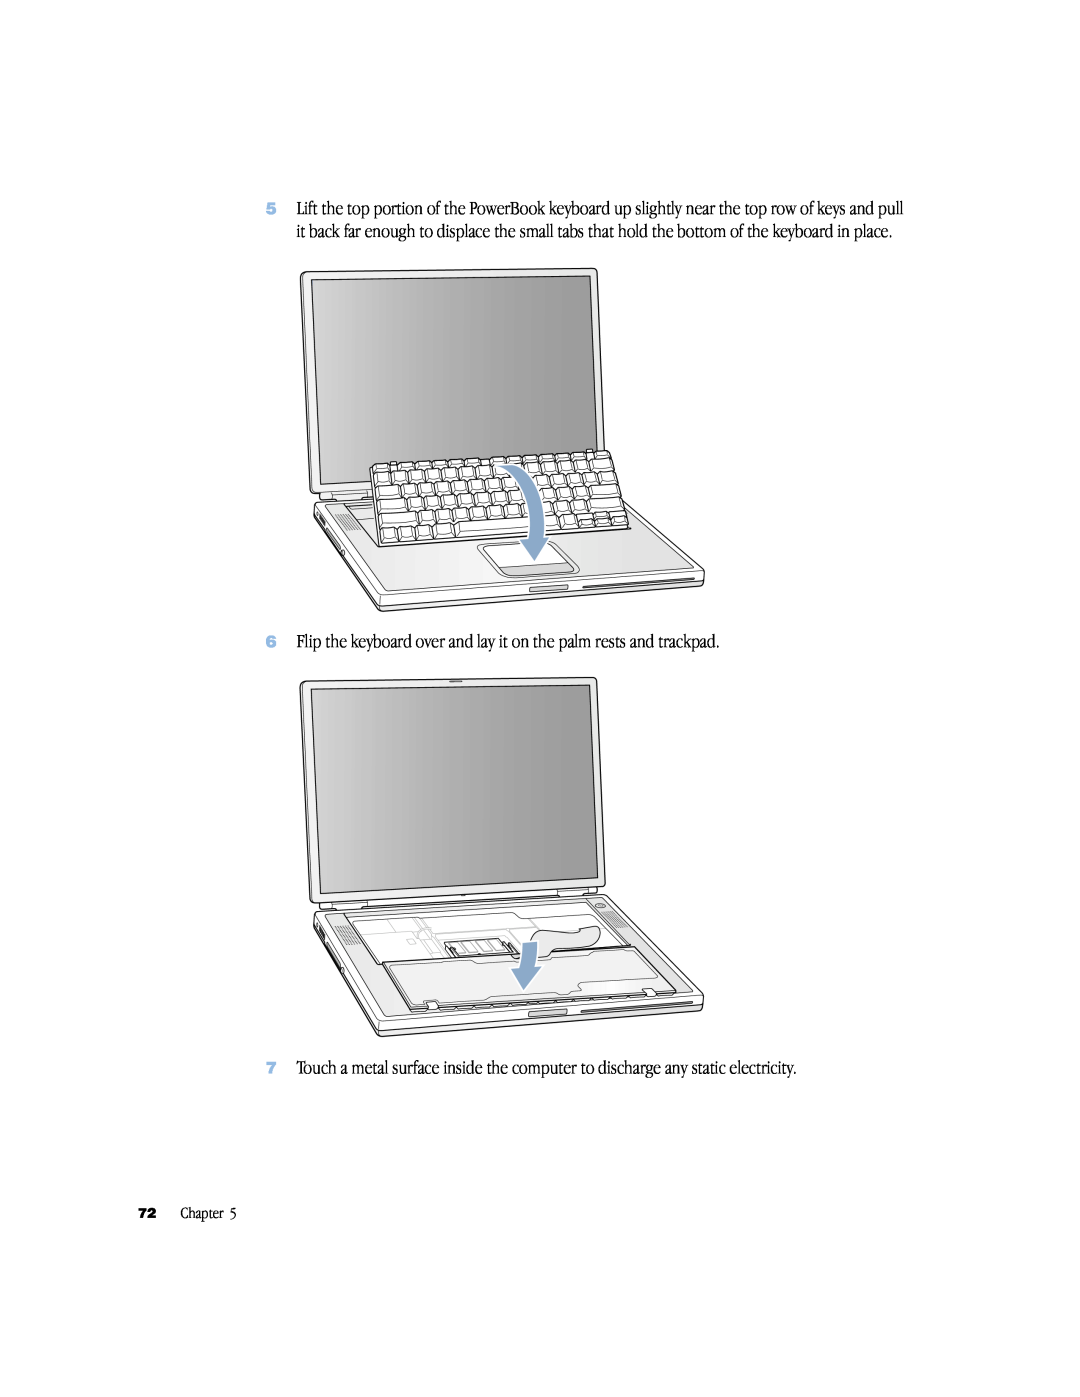 Apple powerbook g4 manual Flip the keyboard over and lay it on the palm rests and trackpad, Chapter 